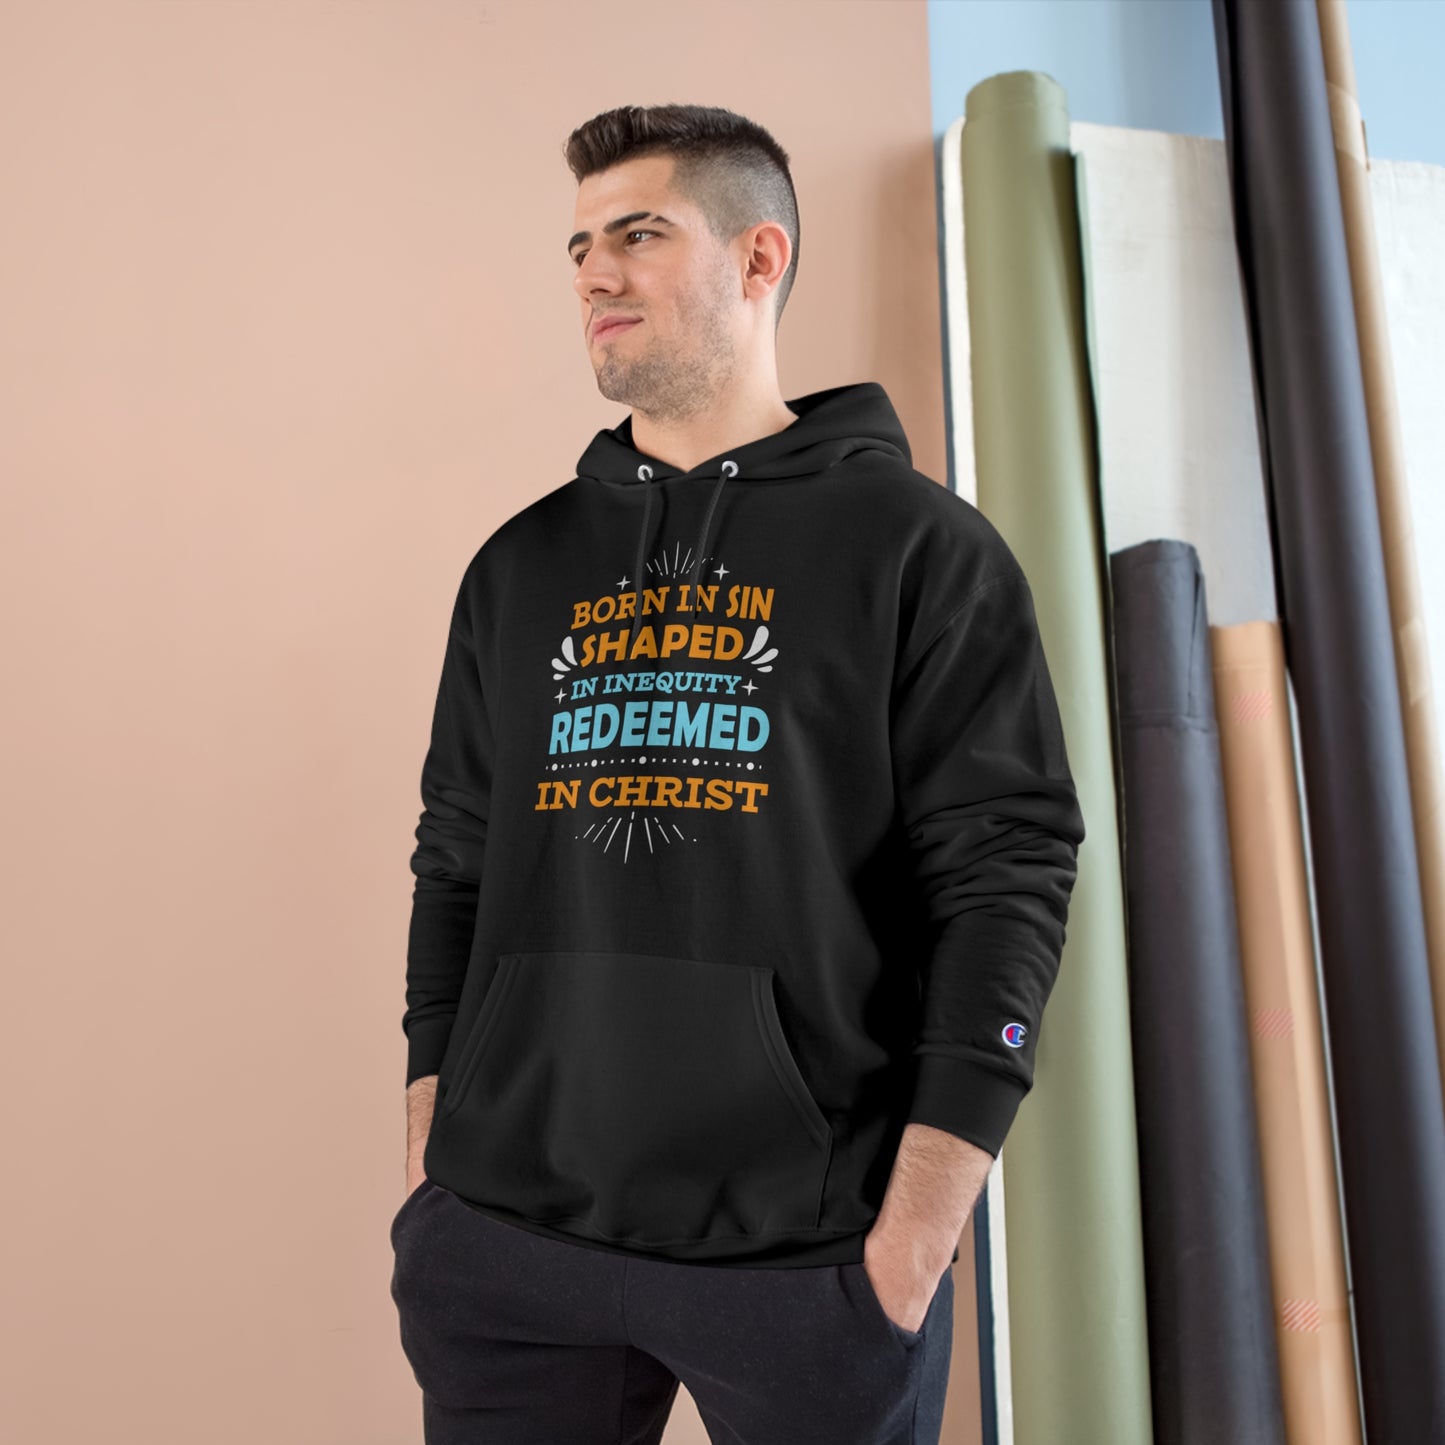 Born In Sin Shaped In Inequity Redeemed In Christ Unisex Champion Hoodie